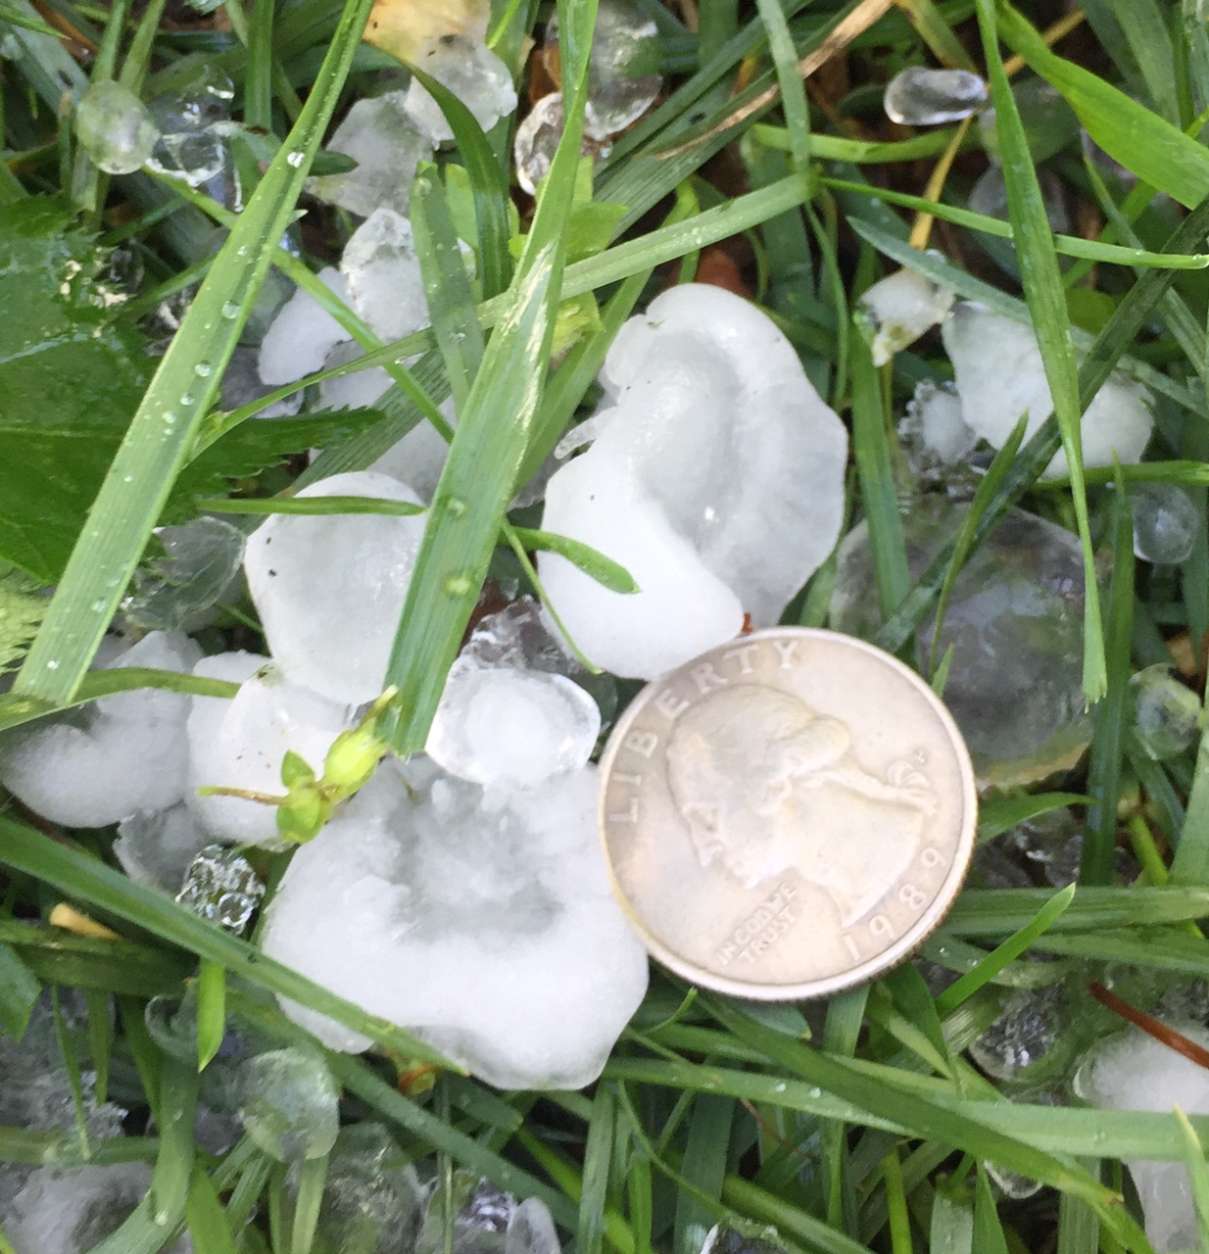 Quarter-sized hail stones fall during the April 21, 2017 storm in the D.C. area. (Courtesy Don Squires)